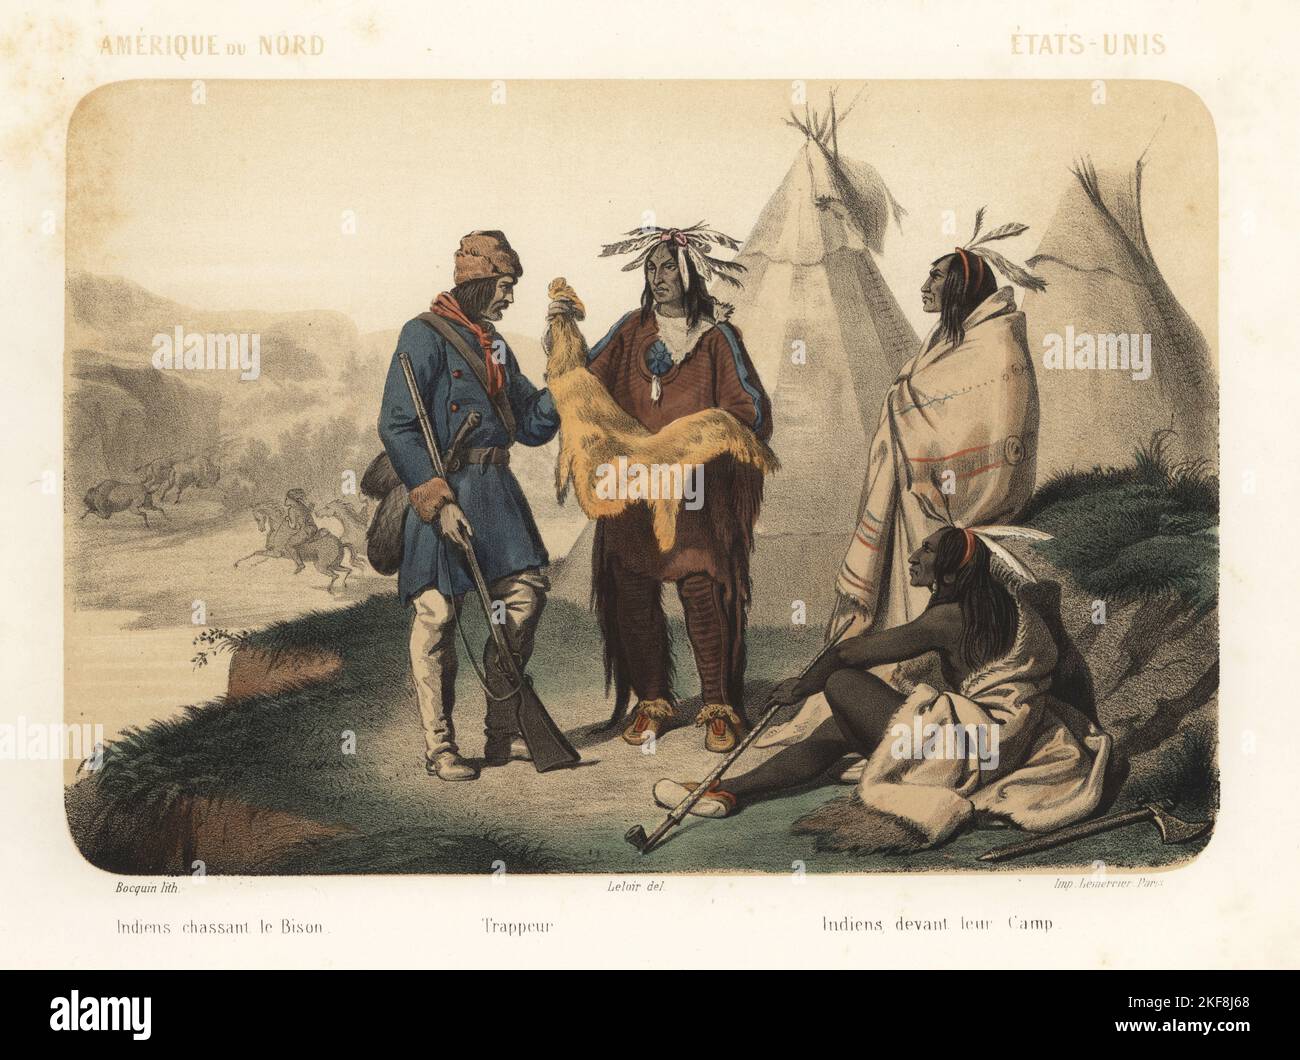 Costumes of North America, 1858. Native Americans or Plains Indians hunting buffalo, European trapper buying skins from Native Americans, wearing feather headdresses and blankets in front of their teepees. Indiens chassant le bison, trappeur, Handcoloured and sepia-tinted lithograph by Jean-Adolphe Bocquin after an illustration by Auguste Leloir from Elisabeth Muller (pseudonym of Leonie Bedelet)’s Le Monde en Estampes, The World in Prints, Amadee Bedelet, Paris, 1858. Indiens devant leur camp. Stock Photo